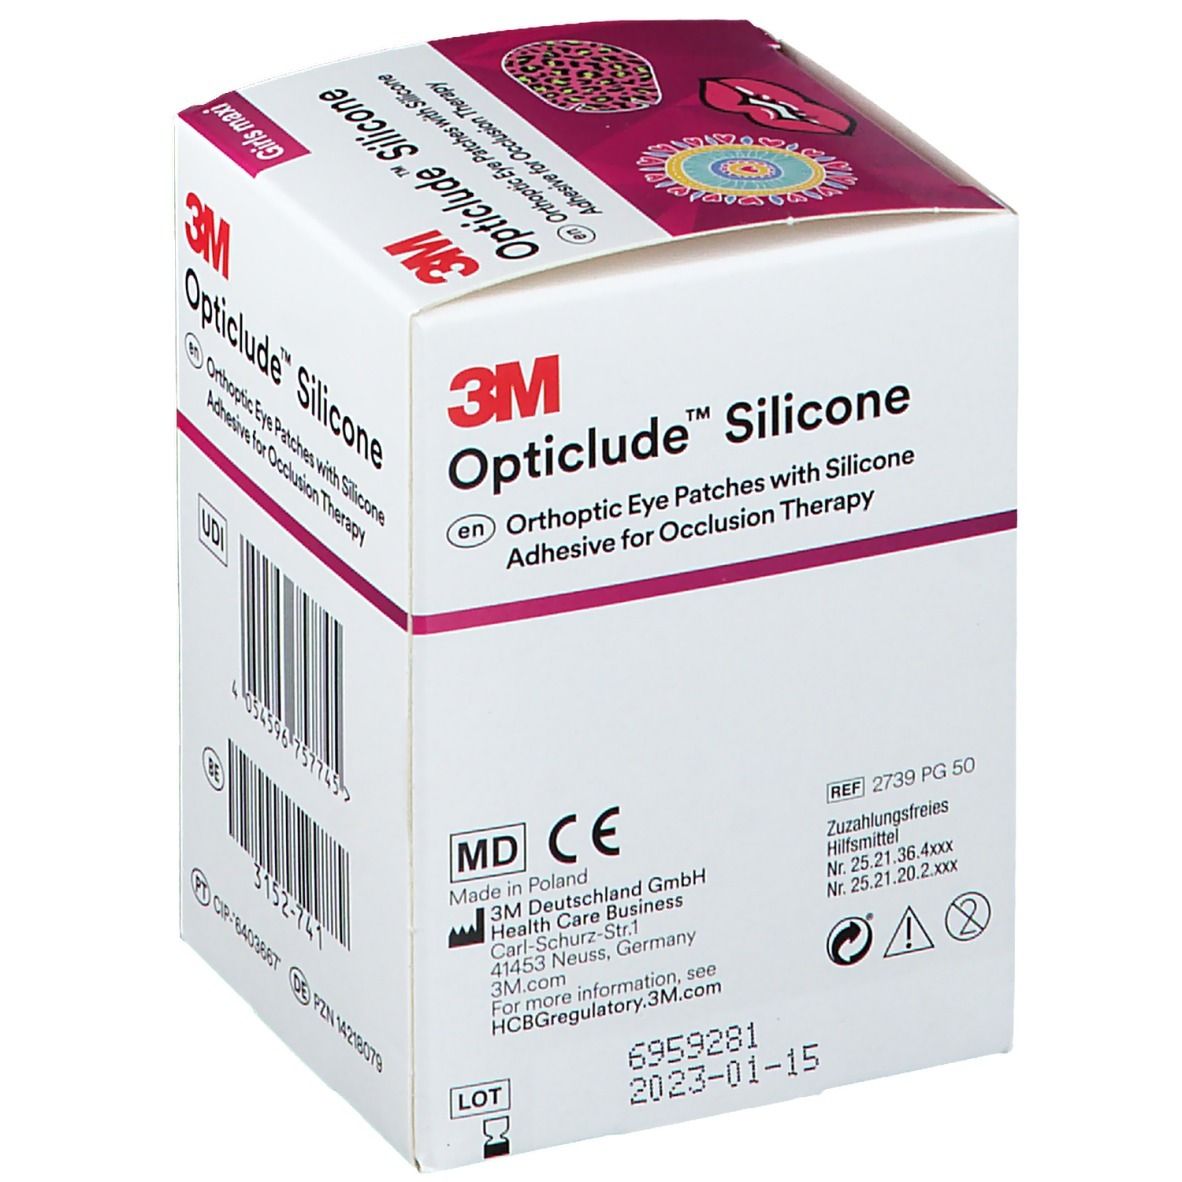 3M™ Opticlude™ Silicone Girls Maxi  5,7 x 8,0 cm